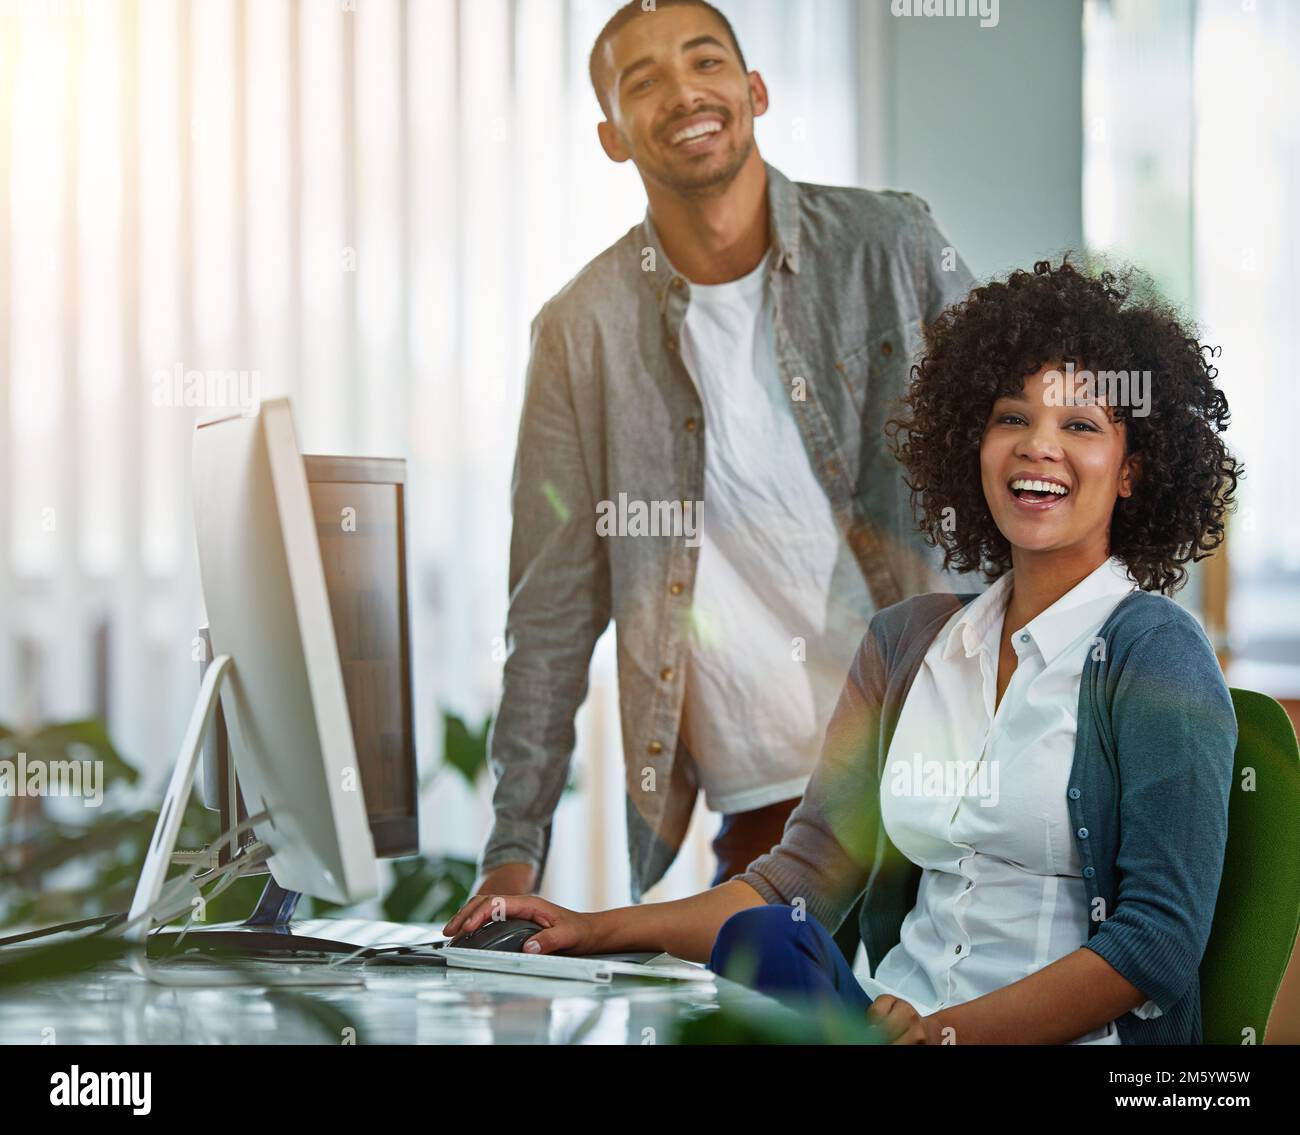 Were at the top of our game. Portrait of designers working together at a workstation in an office. Stock Photo